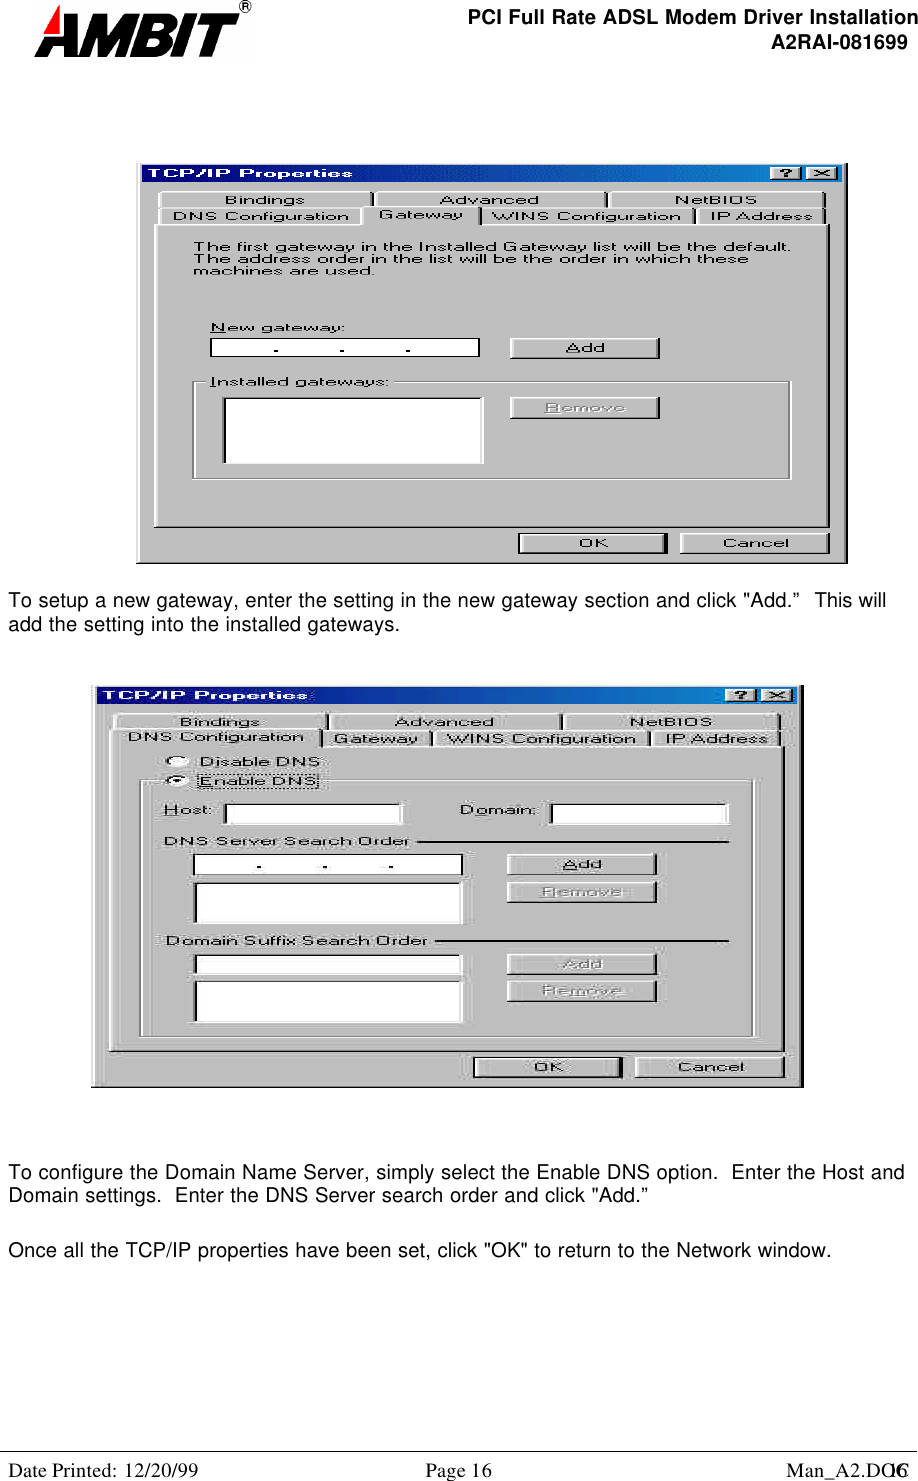 PCI Full Rate ADSL Modem Driver InstallationA2RAI-081699Date Printed: 12/20/99 Page 16 Man_A2.DOC16To setup a new gateway, enter the setting in the new gateway section and click &quot;Add.”  This willadd the setting into the installed gateways.To configure the Domain Name Server, simply select the Enable DNS option.  Enter the Host andDomain settings.  Enter the DNS Server search order and click &quot;Add.”Once all the TCP/IP properties have been set, click &quot;OK&quot; to return to the Network window.